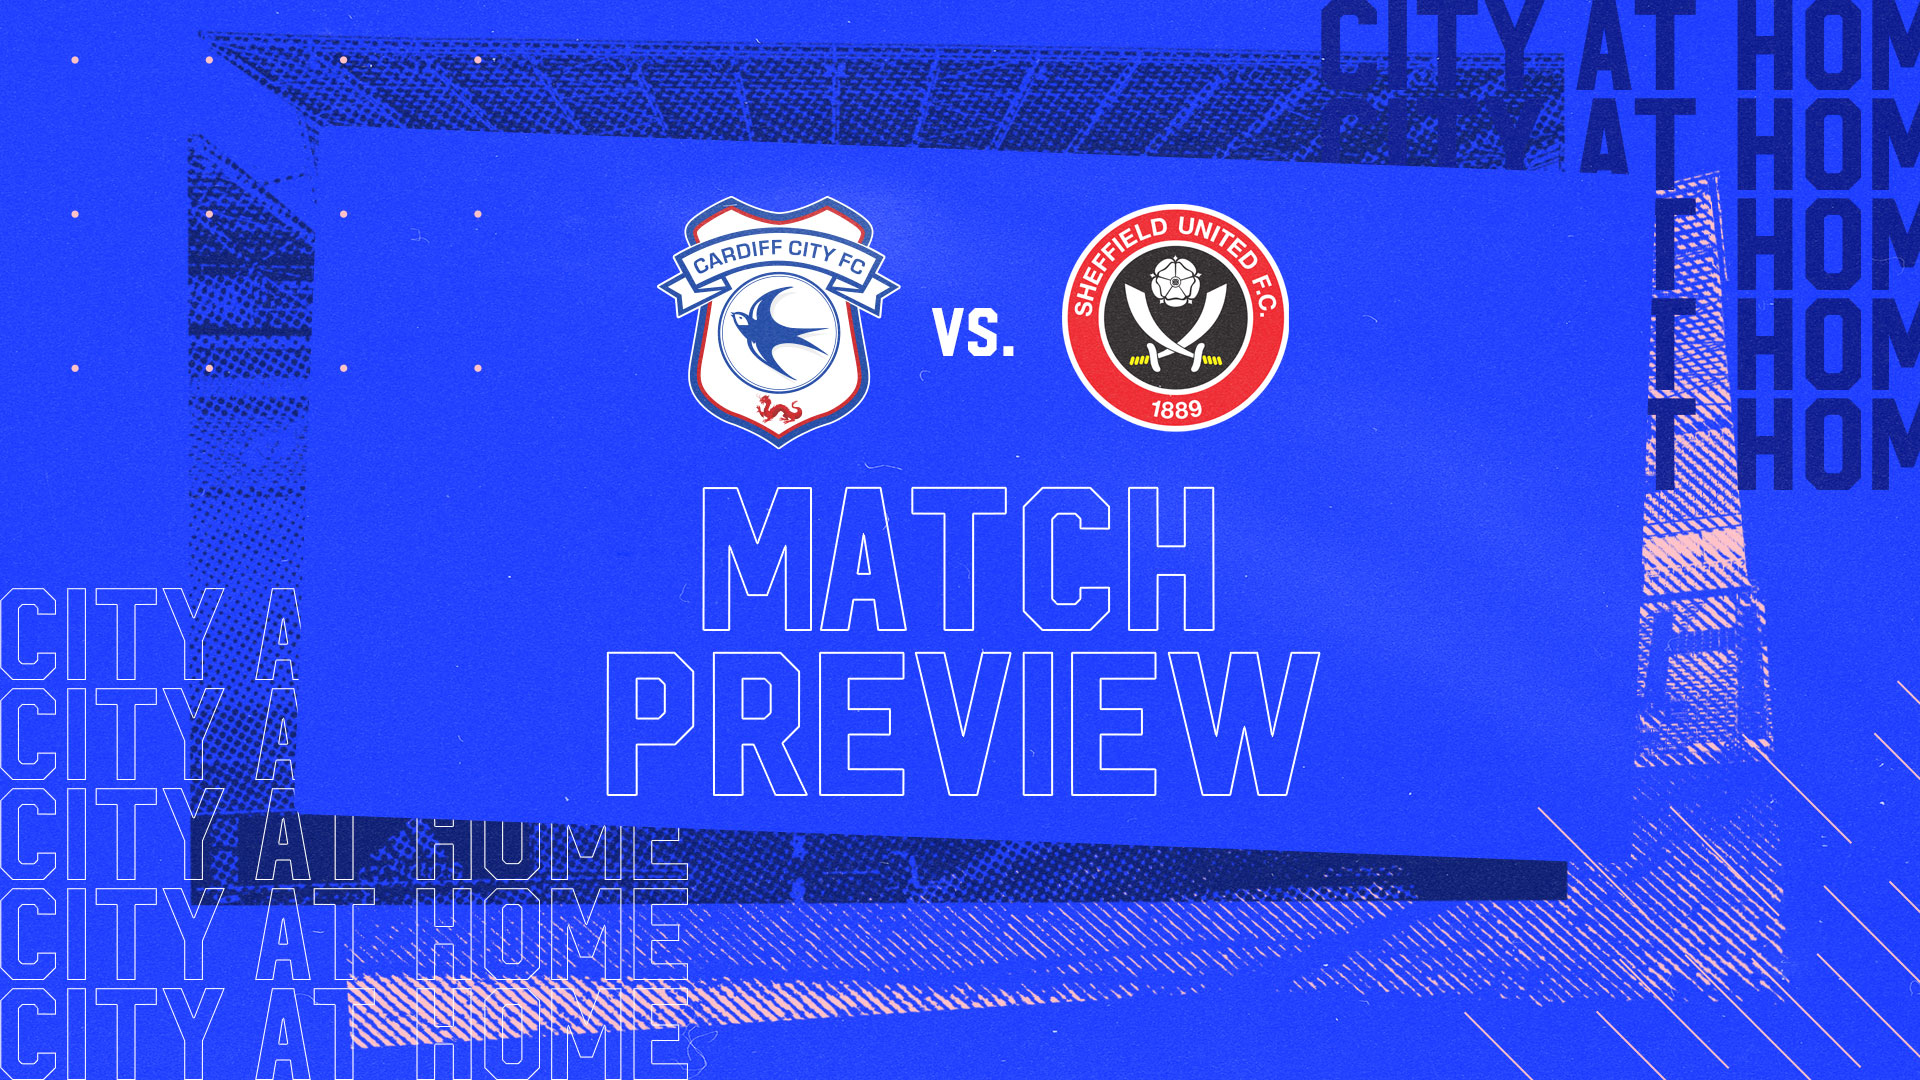 The Bluebirds host the Blades this weekend...